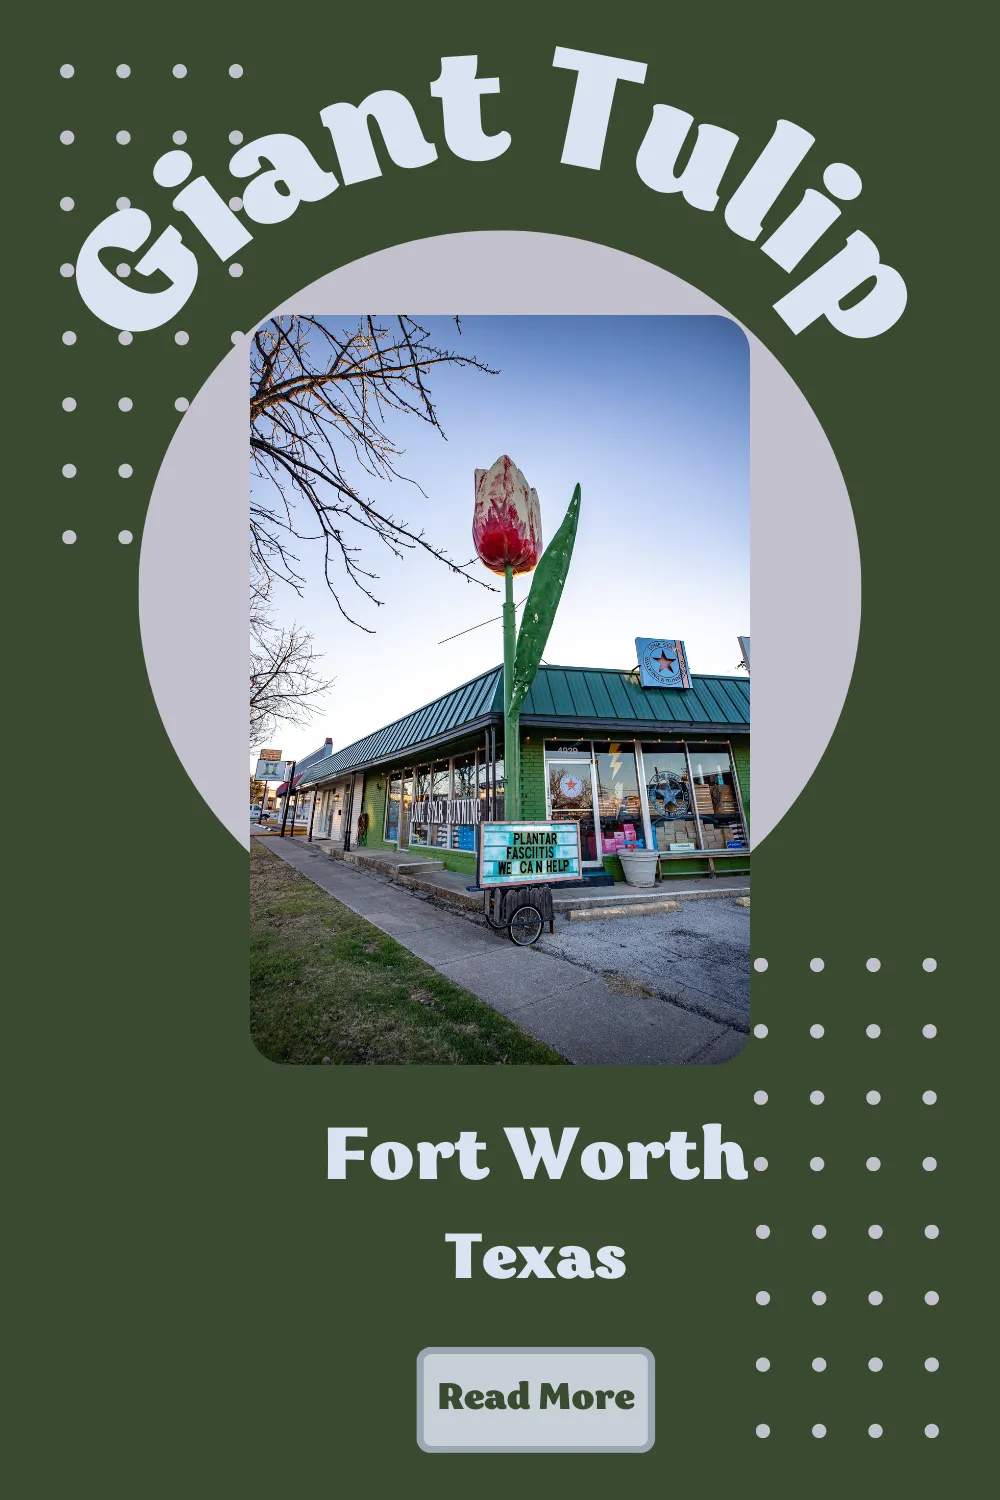 Visit the giant tulip roadside attraction Fort Worth, Texas on your next Texas road trip. Add this fun and weird roadside attraction to your travel itinerary. The 20-foot tall big flower can be found at the athletic store, Lone Star Walking & Running Co. in Fort Worth. #RoadTrip #TexasRoadTrip #Texas #FortWorth #FortWorthRoadTrip #RoadsideAttraction #RoadsideAttractions #TexasRoadsideAttraction #RoadsideAmerica